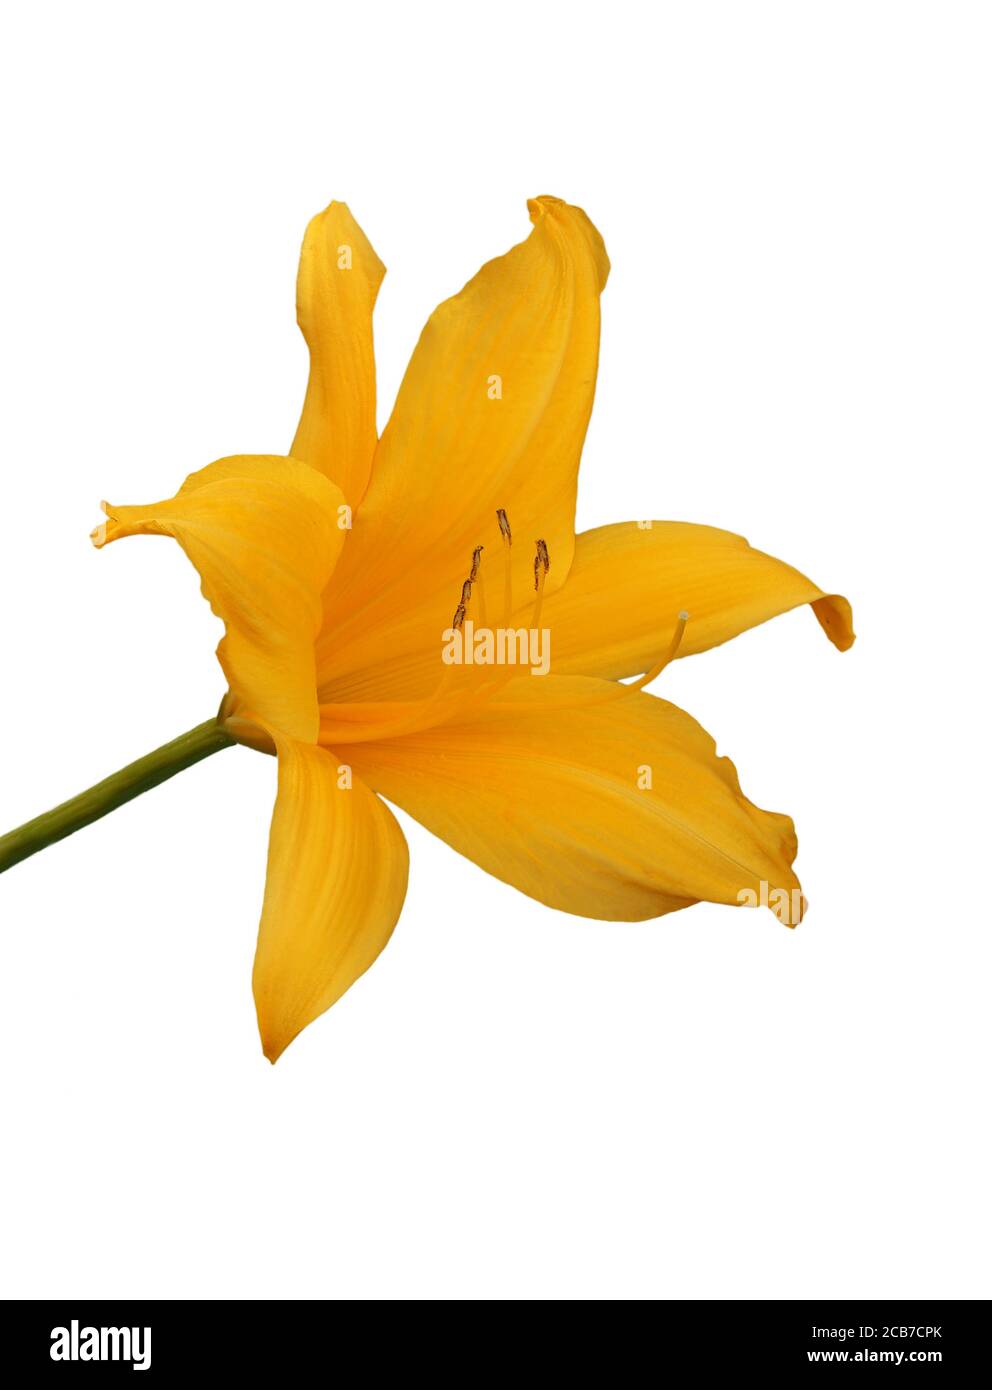 A Single Focus Stacked Yellow Lily Isolated on White Stock Photo